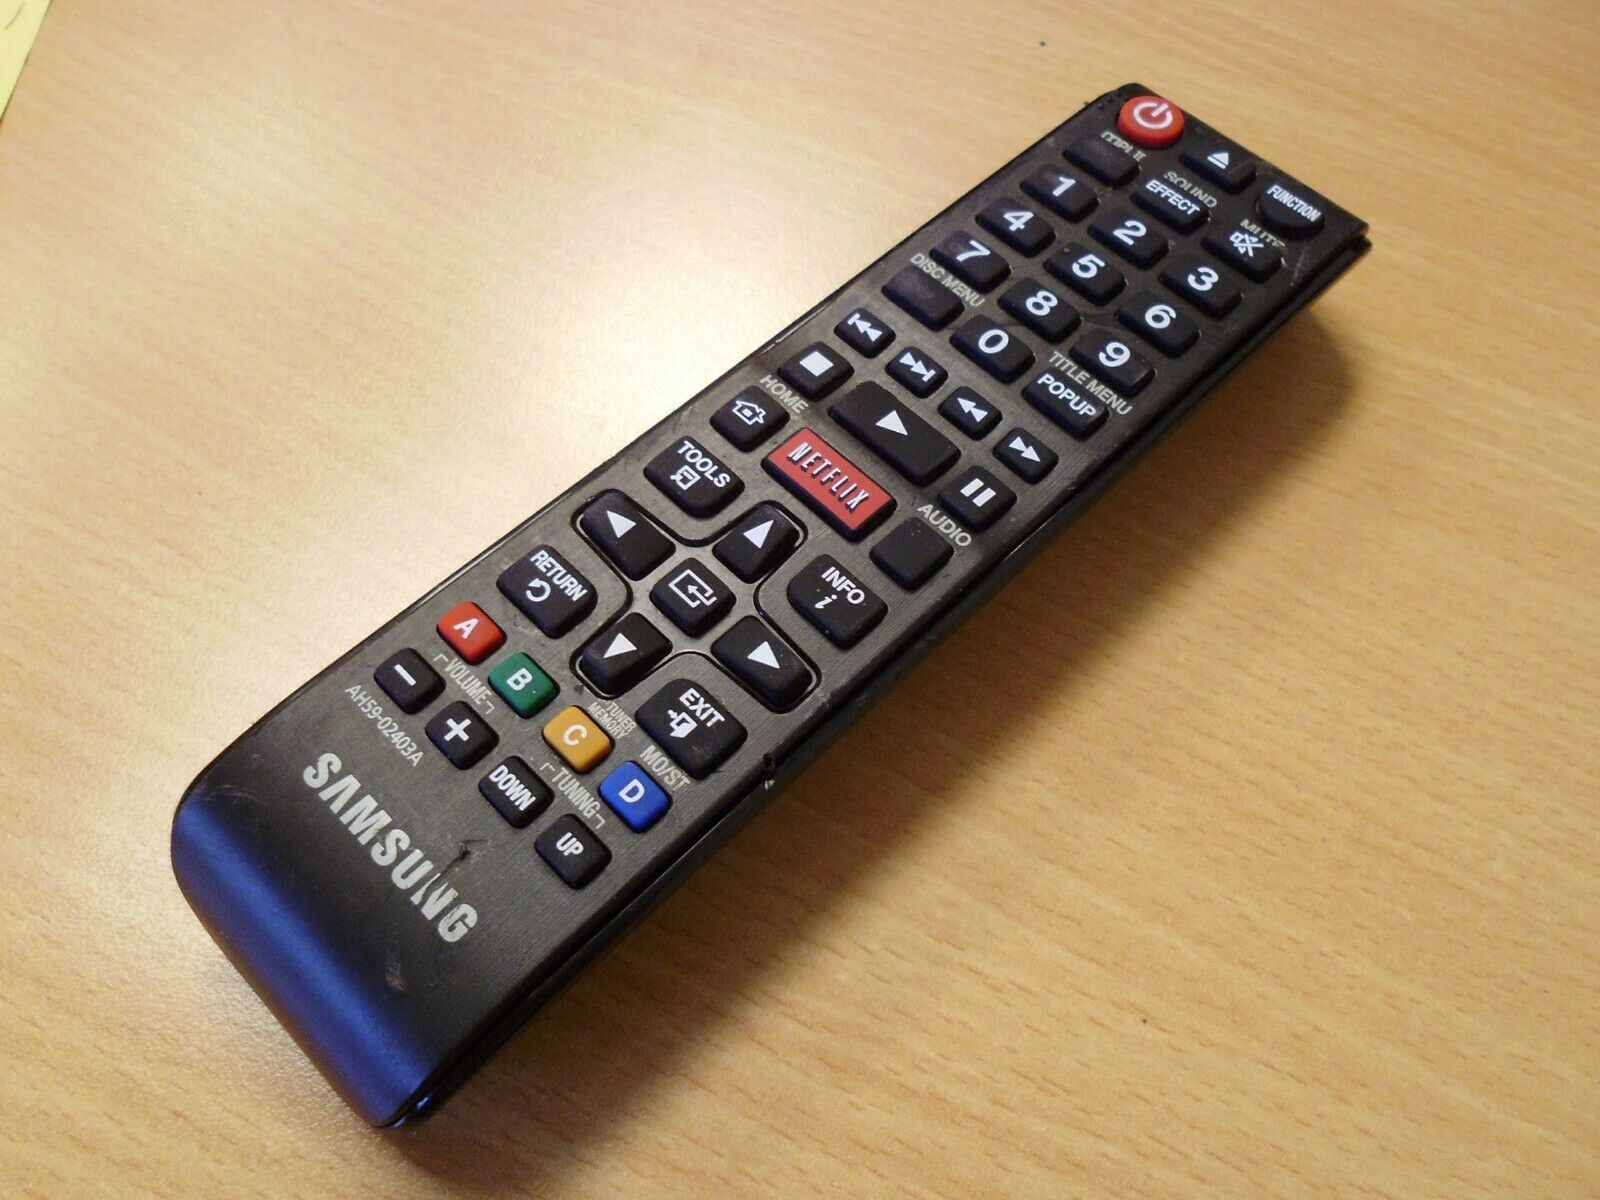 where-is-the-home-button-on-samsung-smart-tv-remote